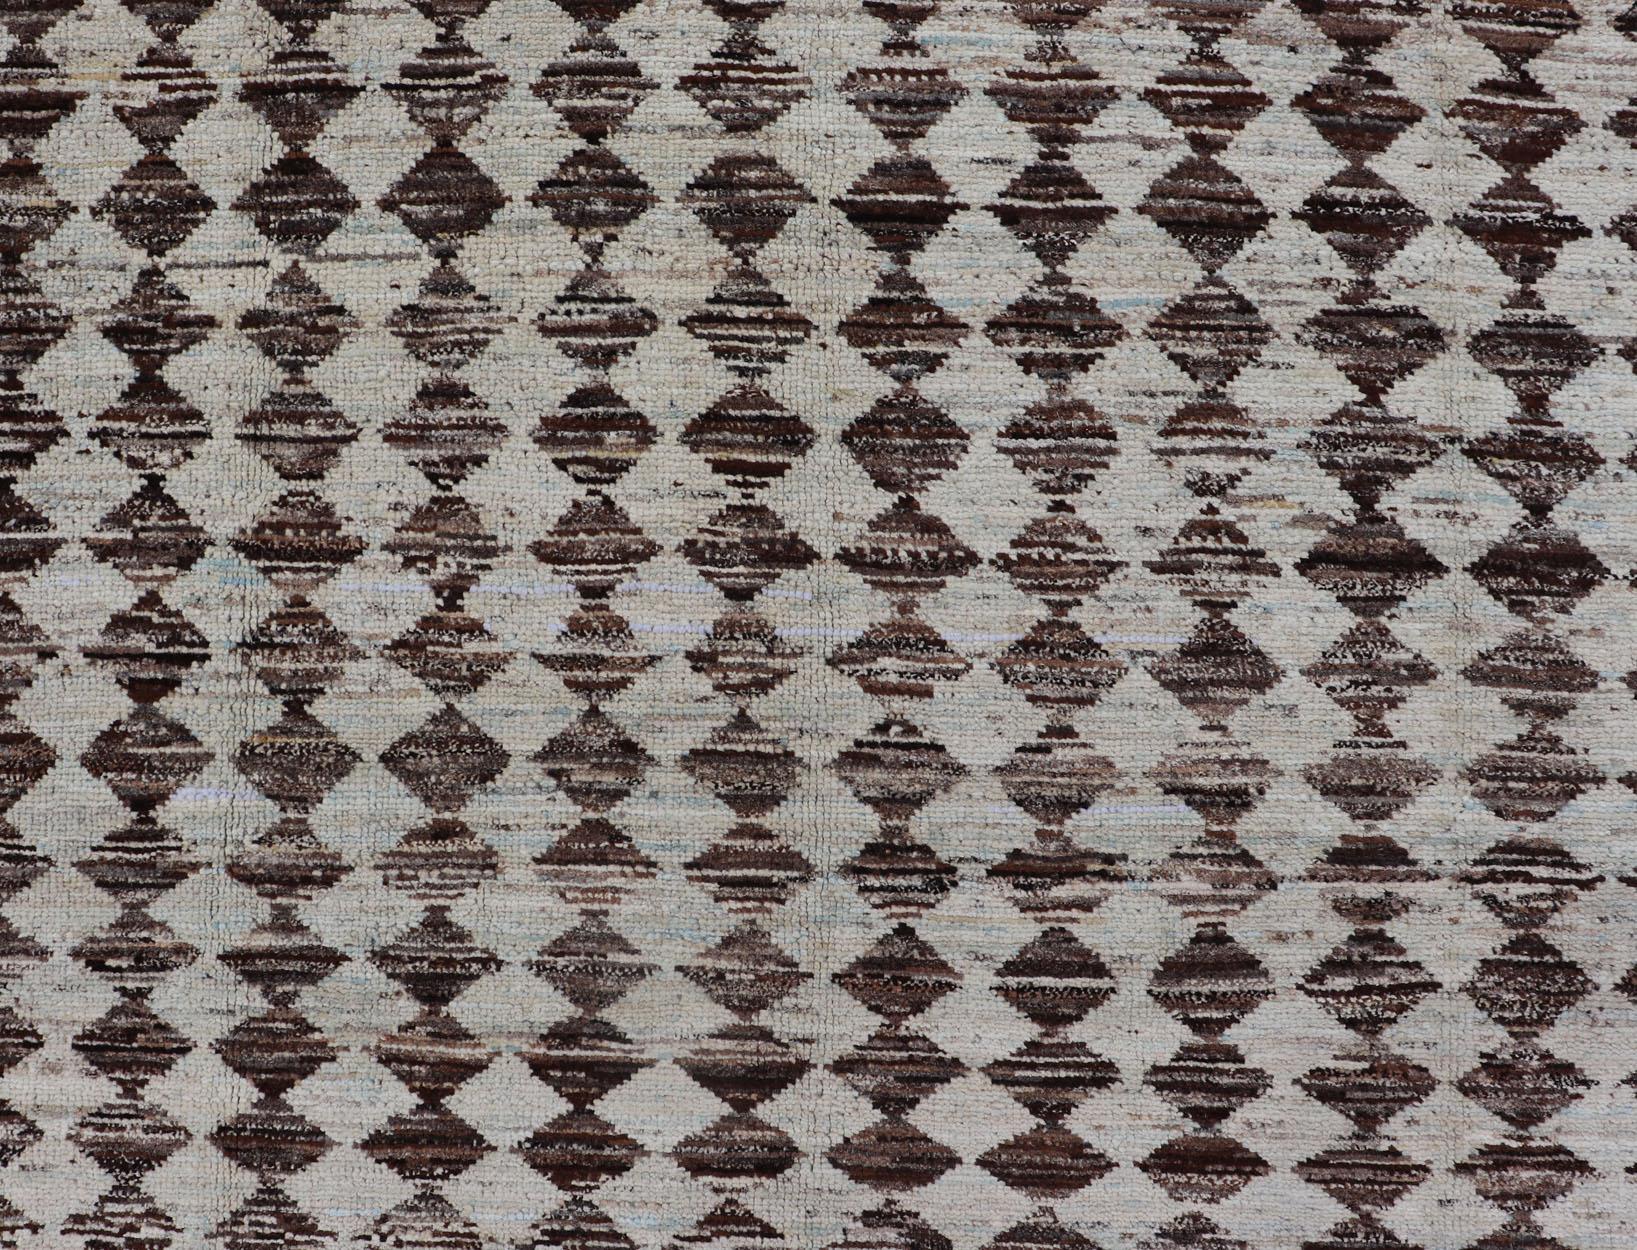 Wool Tribal Moroccan with Intricate Diamond Pattern in White and Brown Tones For Sale